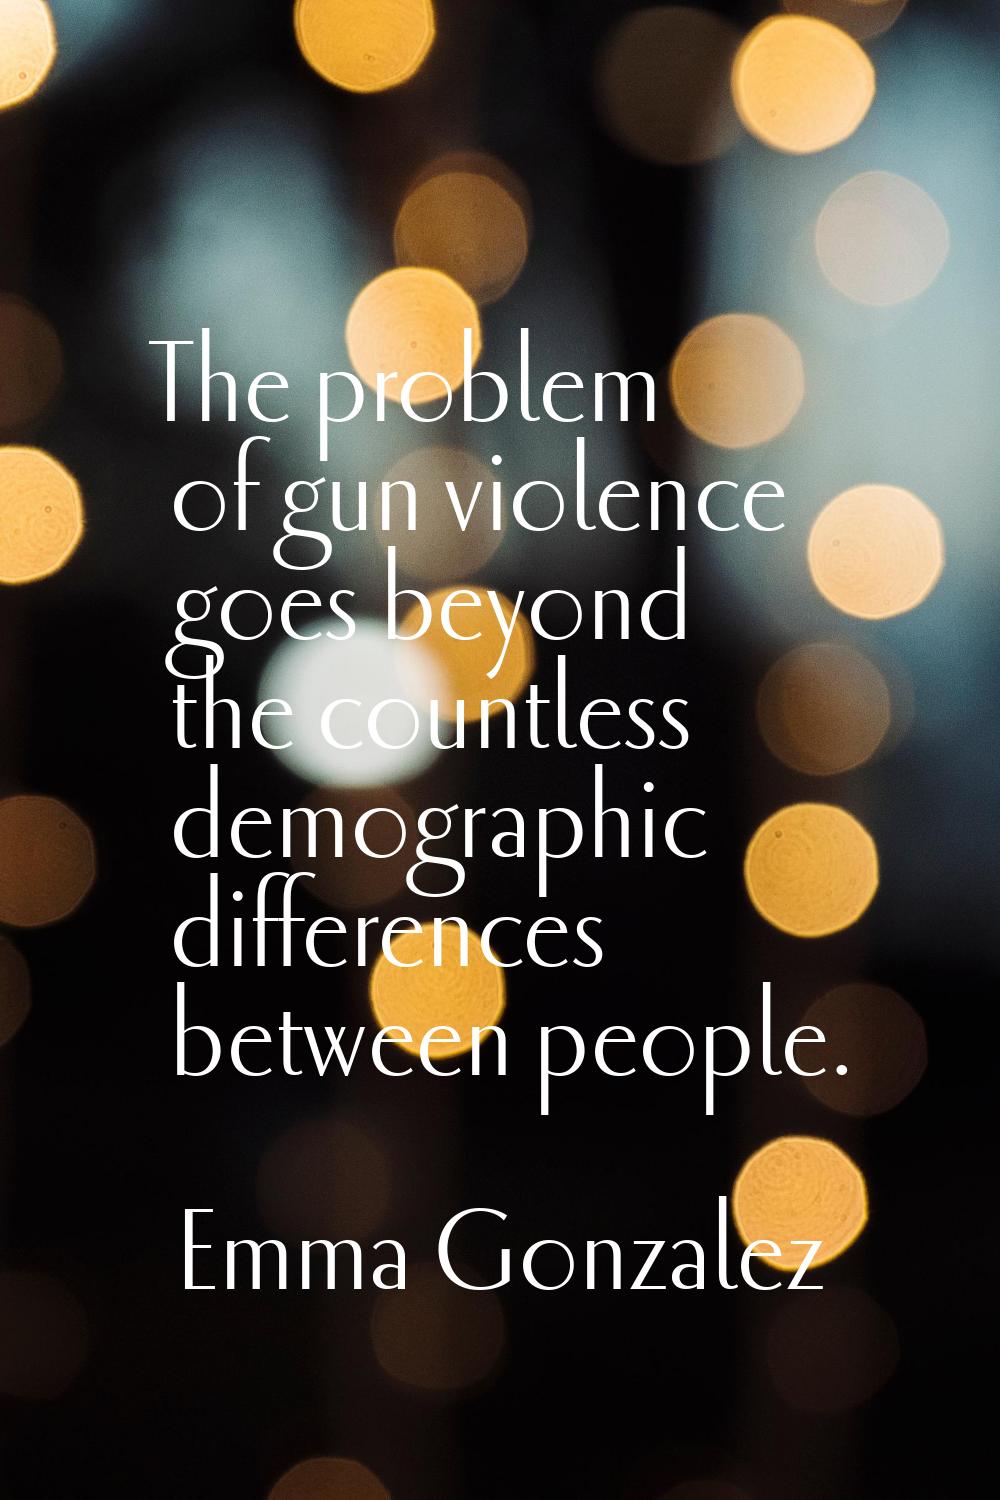 The problem of gun violence goes beyond the countless demographic differences between people.